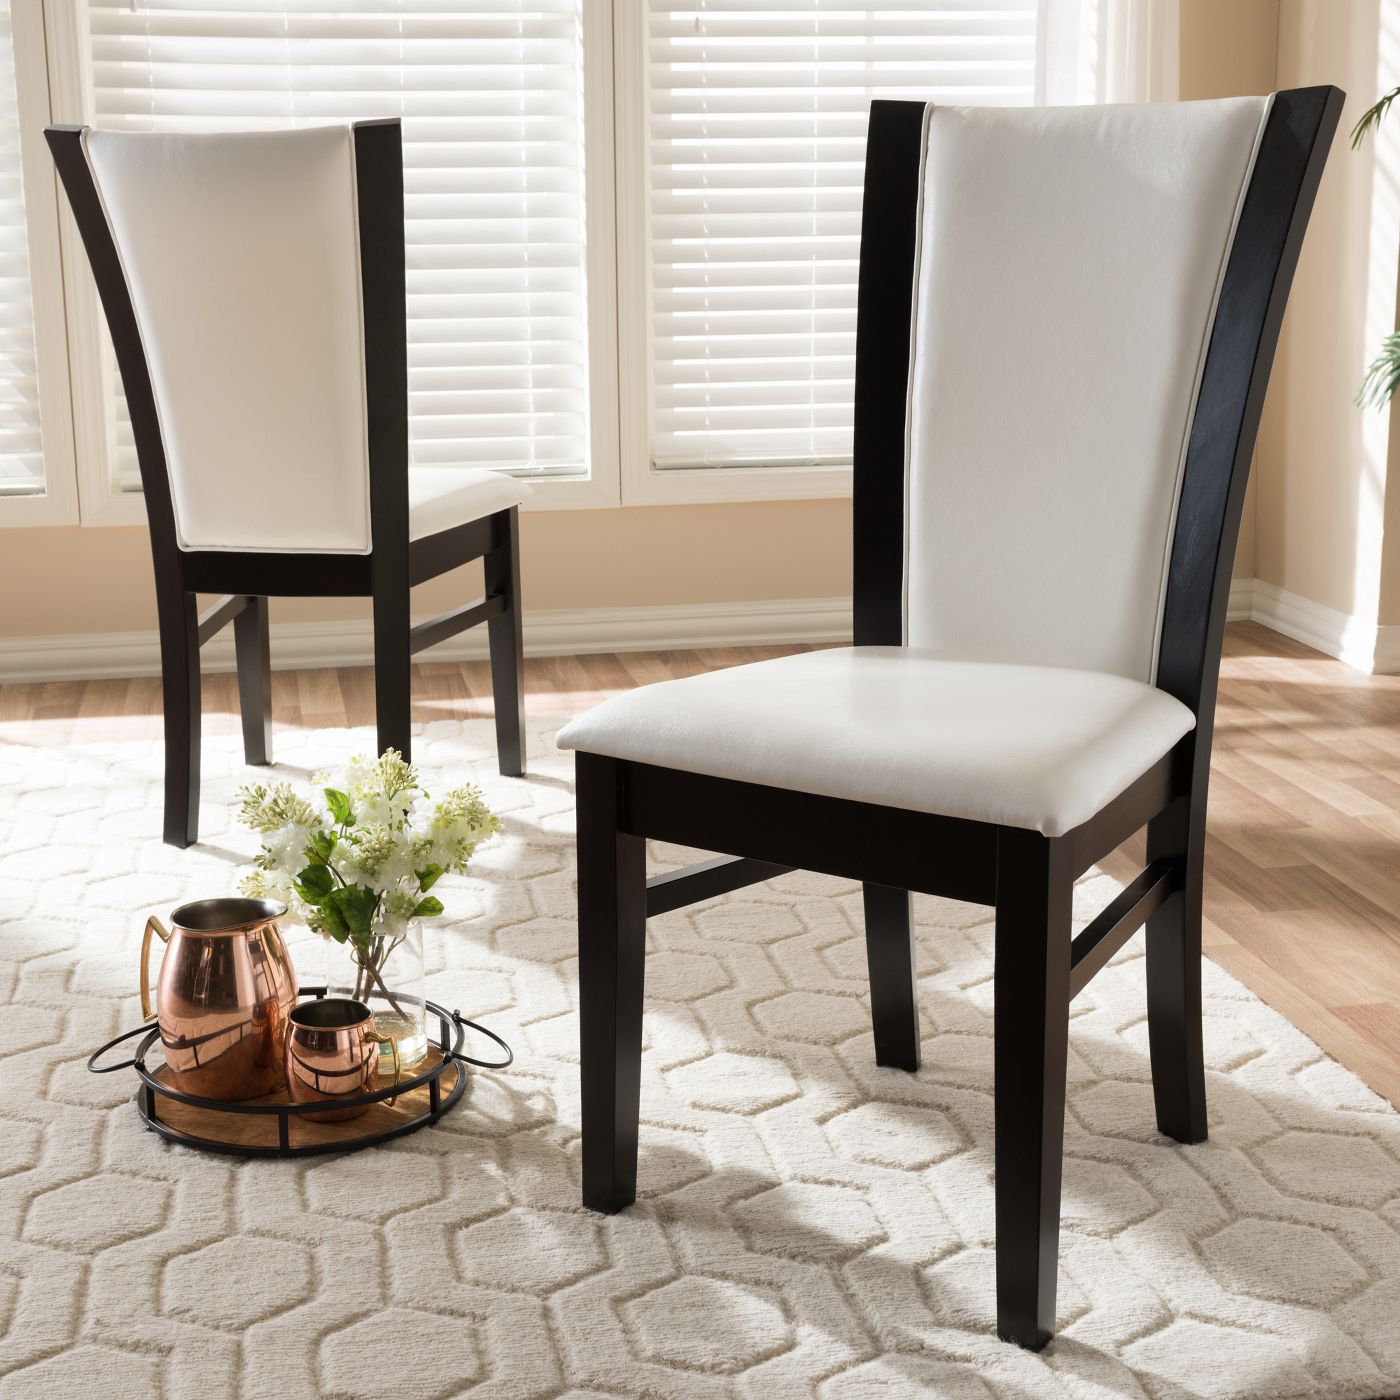 Set of 4 Adley Modern Faux Leather Dining Chairs White/Dark Brown 2006 (2 boxes)